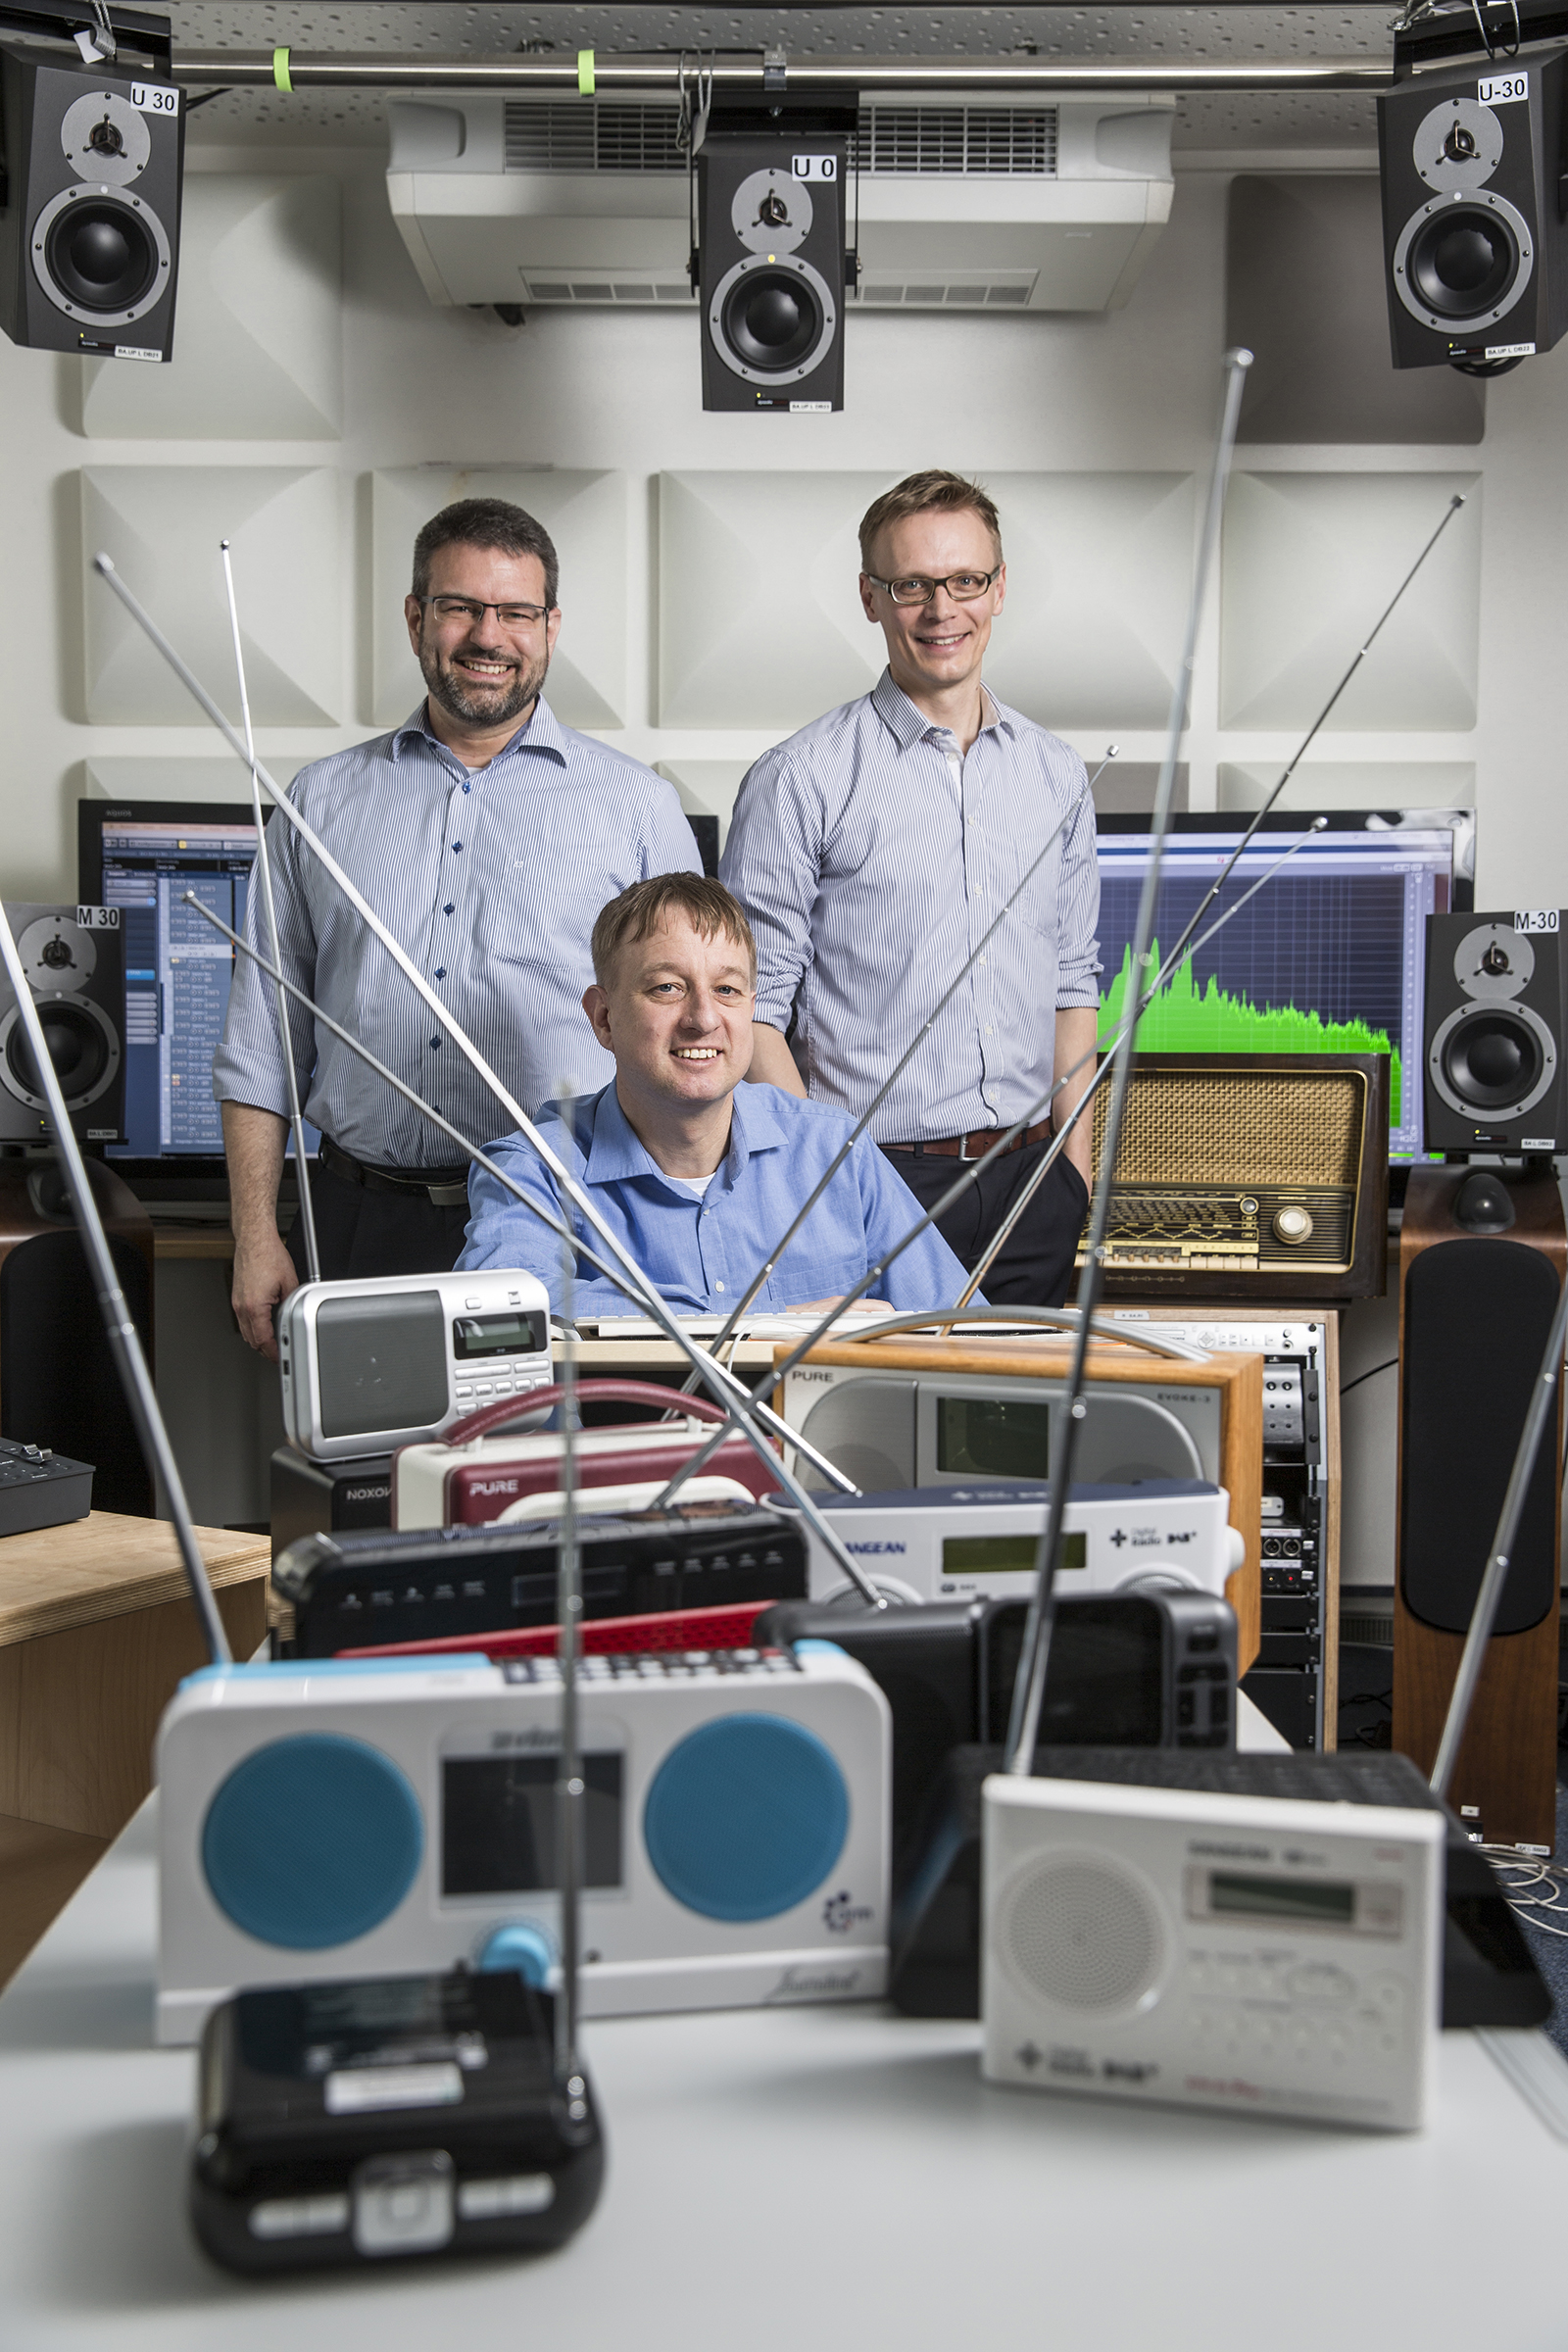 In order to help digital radio make a worldwide market breakthrough, Alexander Zink, Martin Speitel and Max Neuendorf (from the left) developed technologies for the entire broadcast chain.